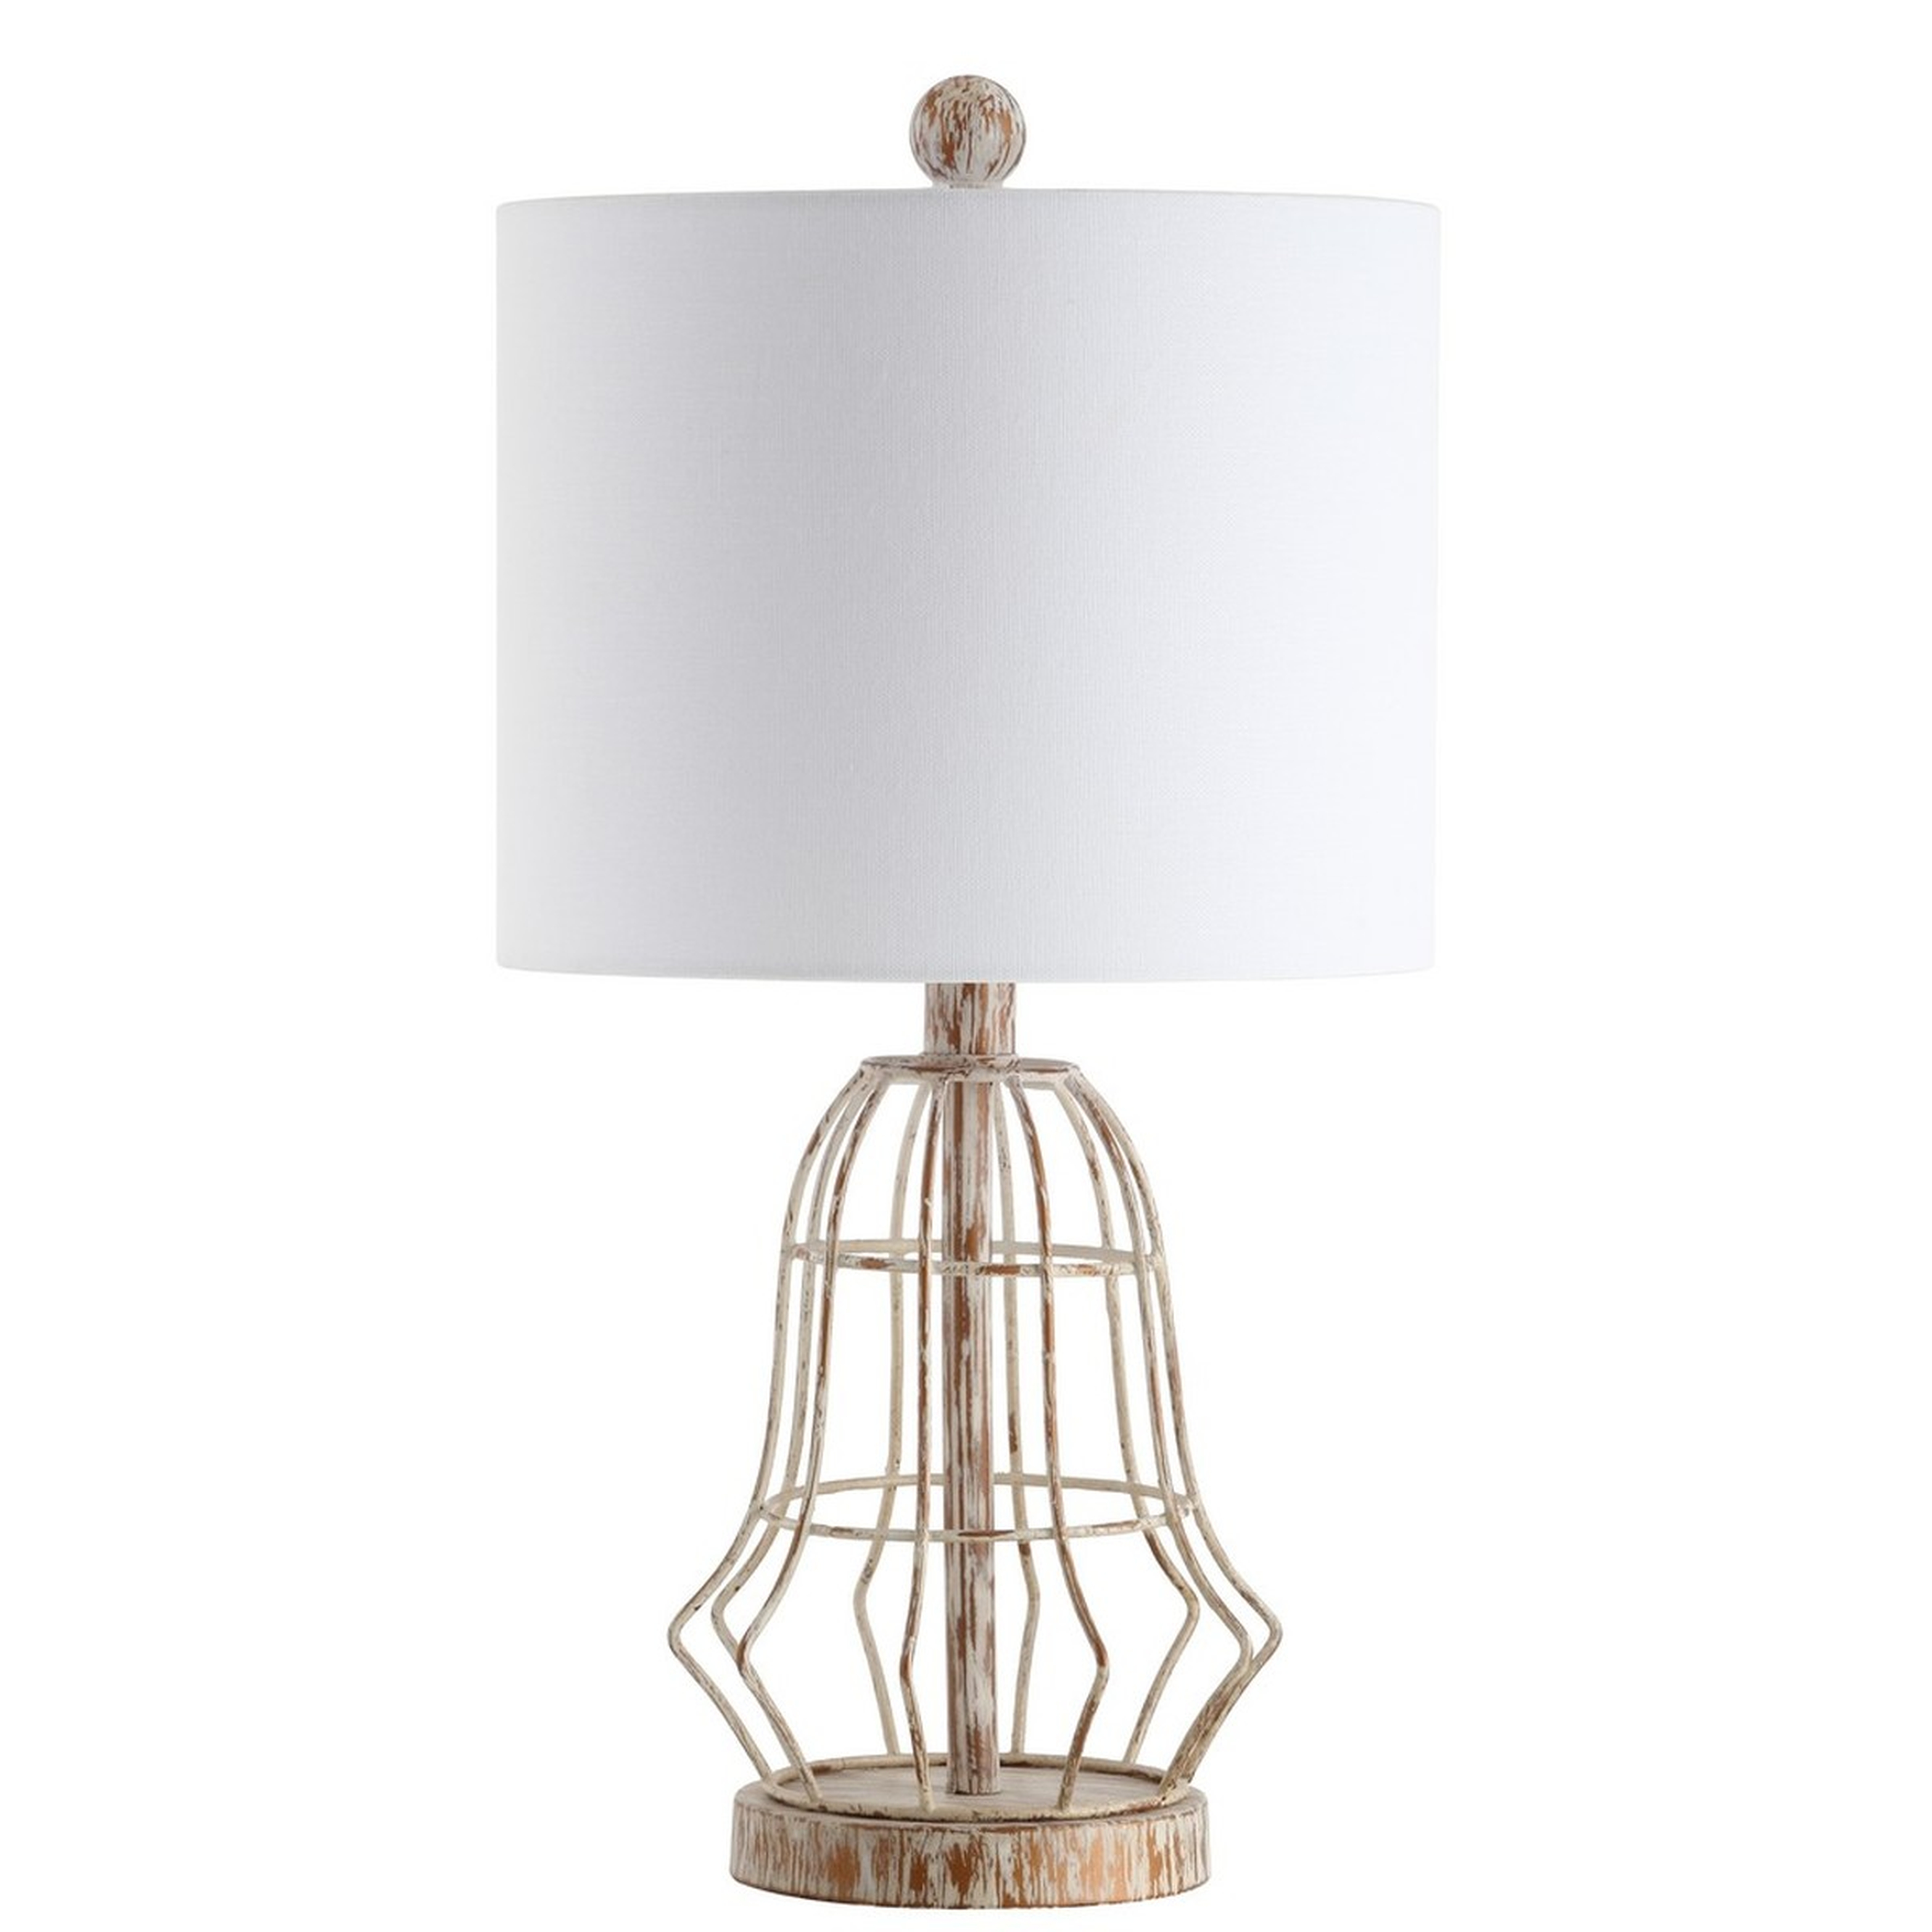 Canes Table Lamp, Antiqued - Arlo Home